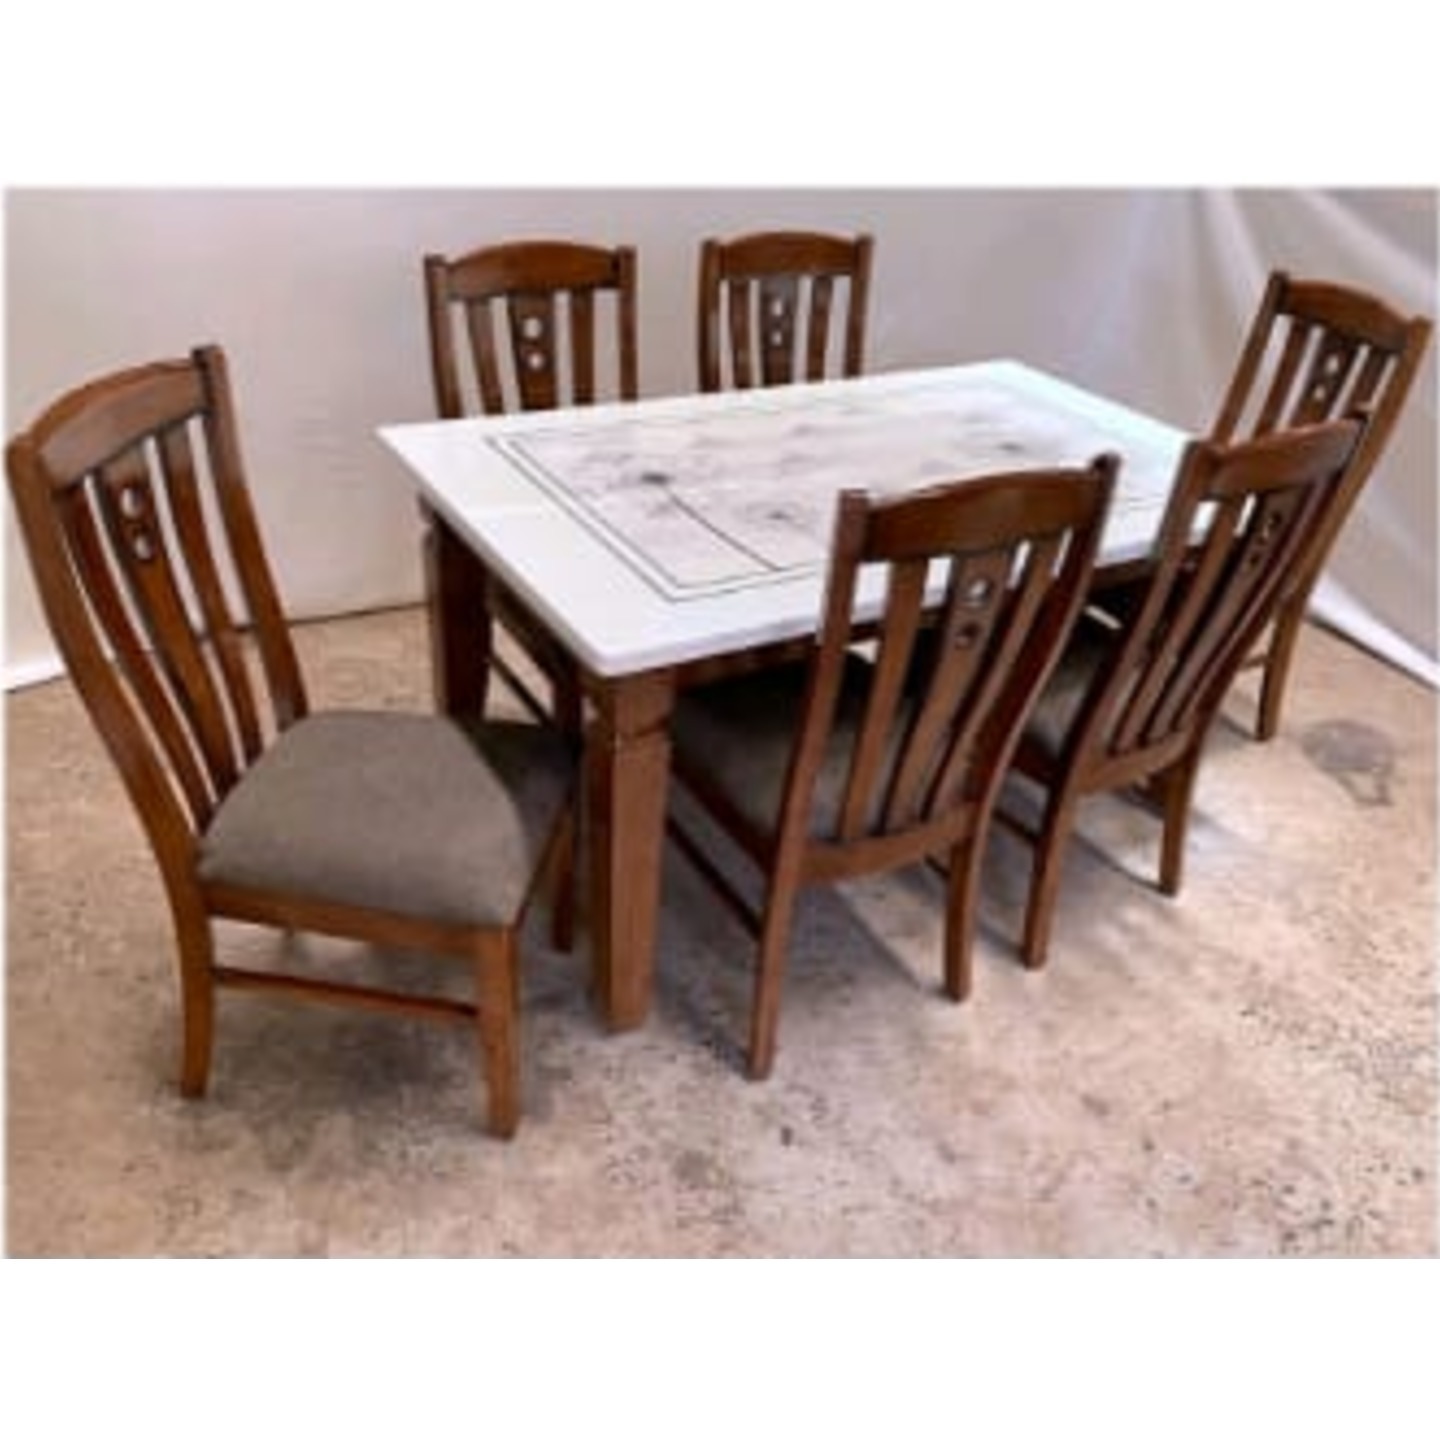 DW Marble Top H-008 Six Seater Dining Table Set in Brown Colour